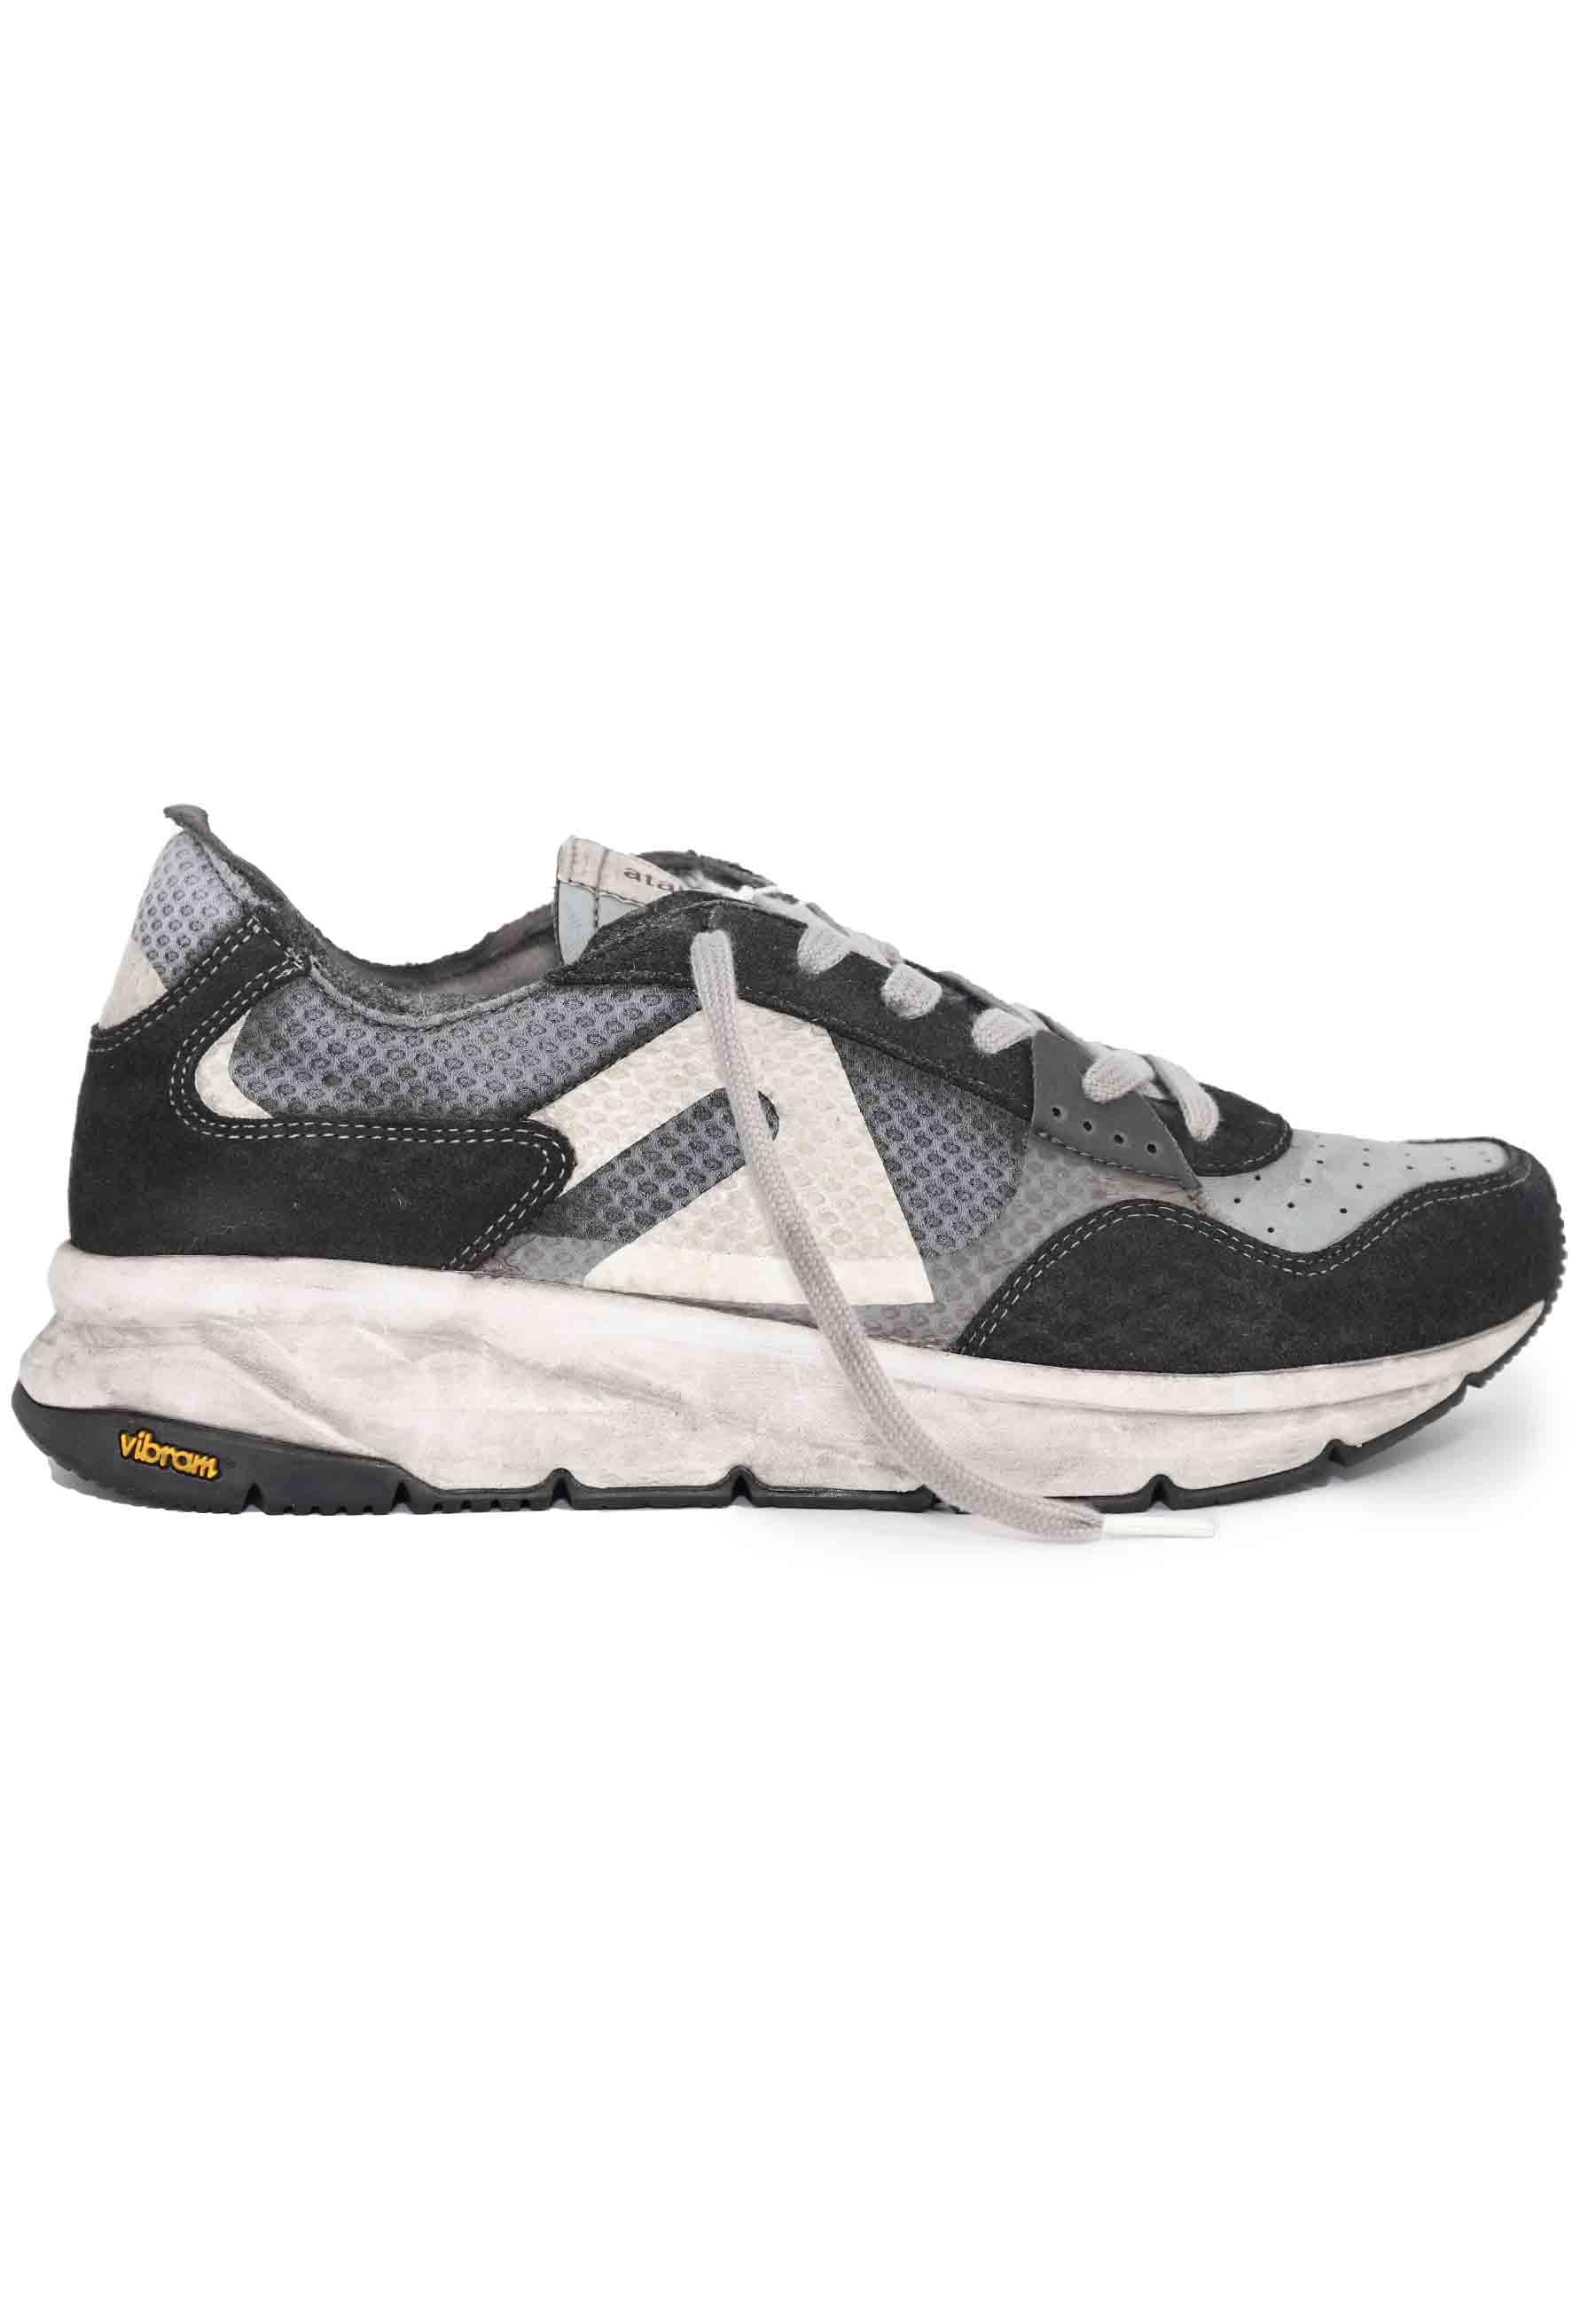 Men's sneakers in technical fabric and gray leather with vibram sole